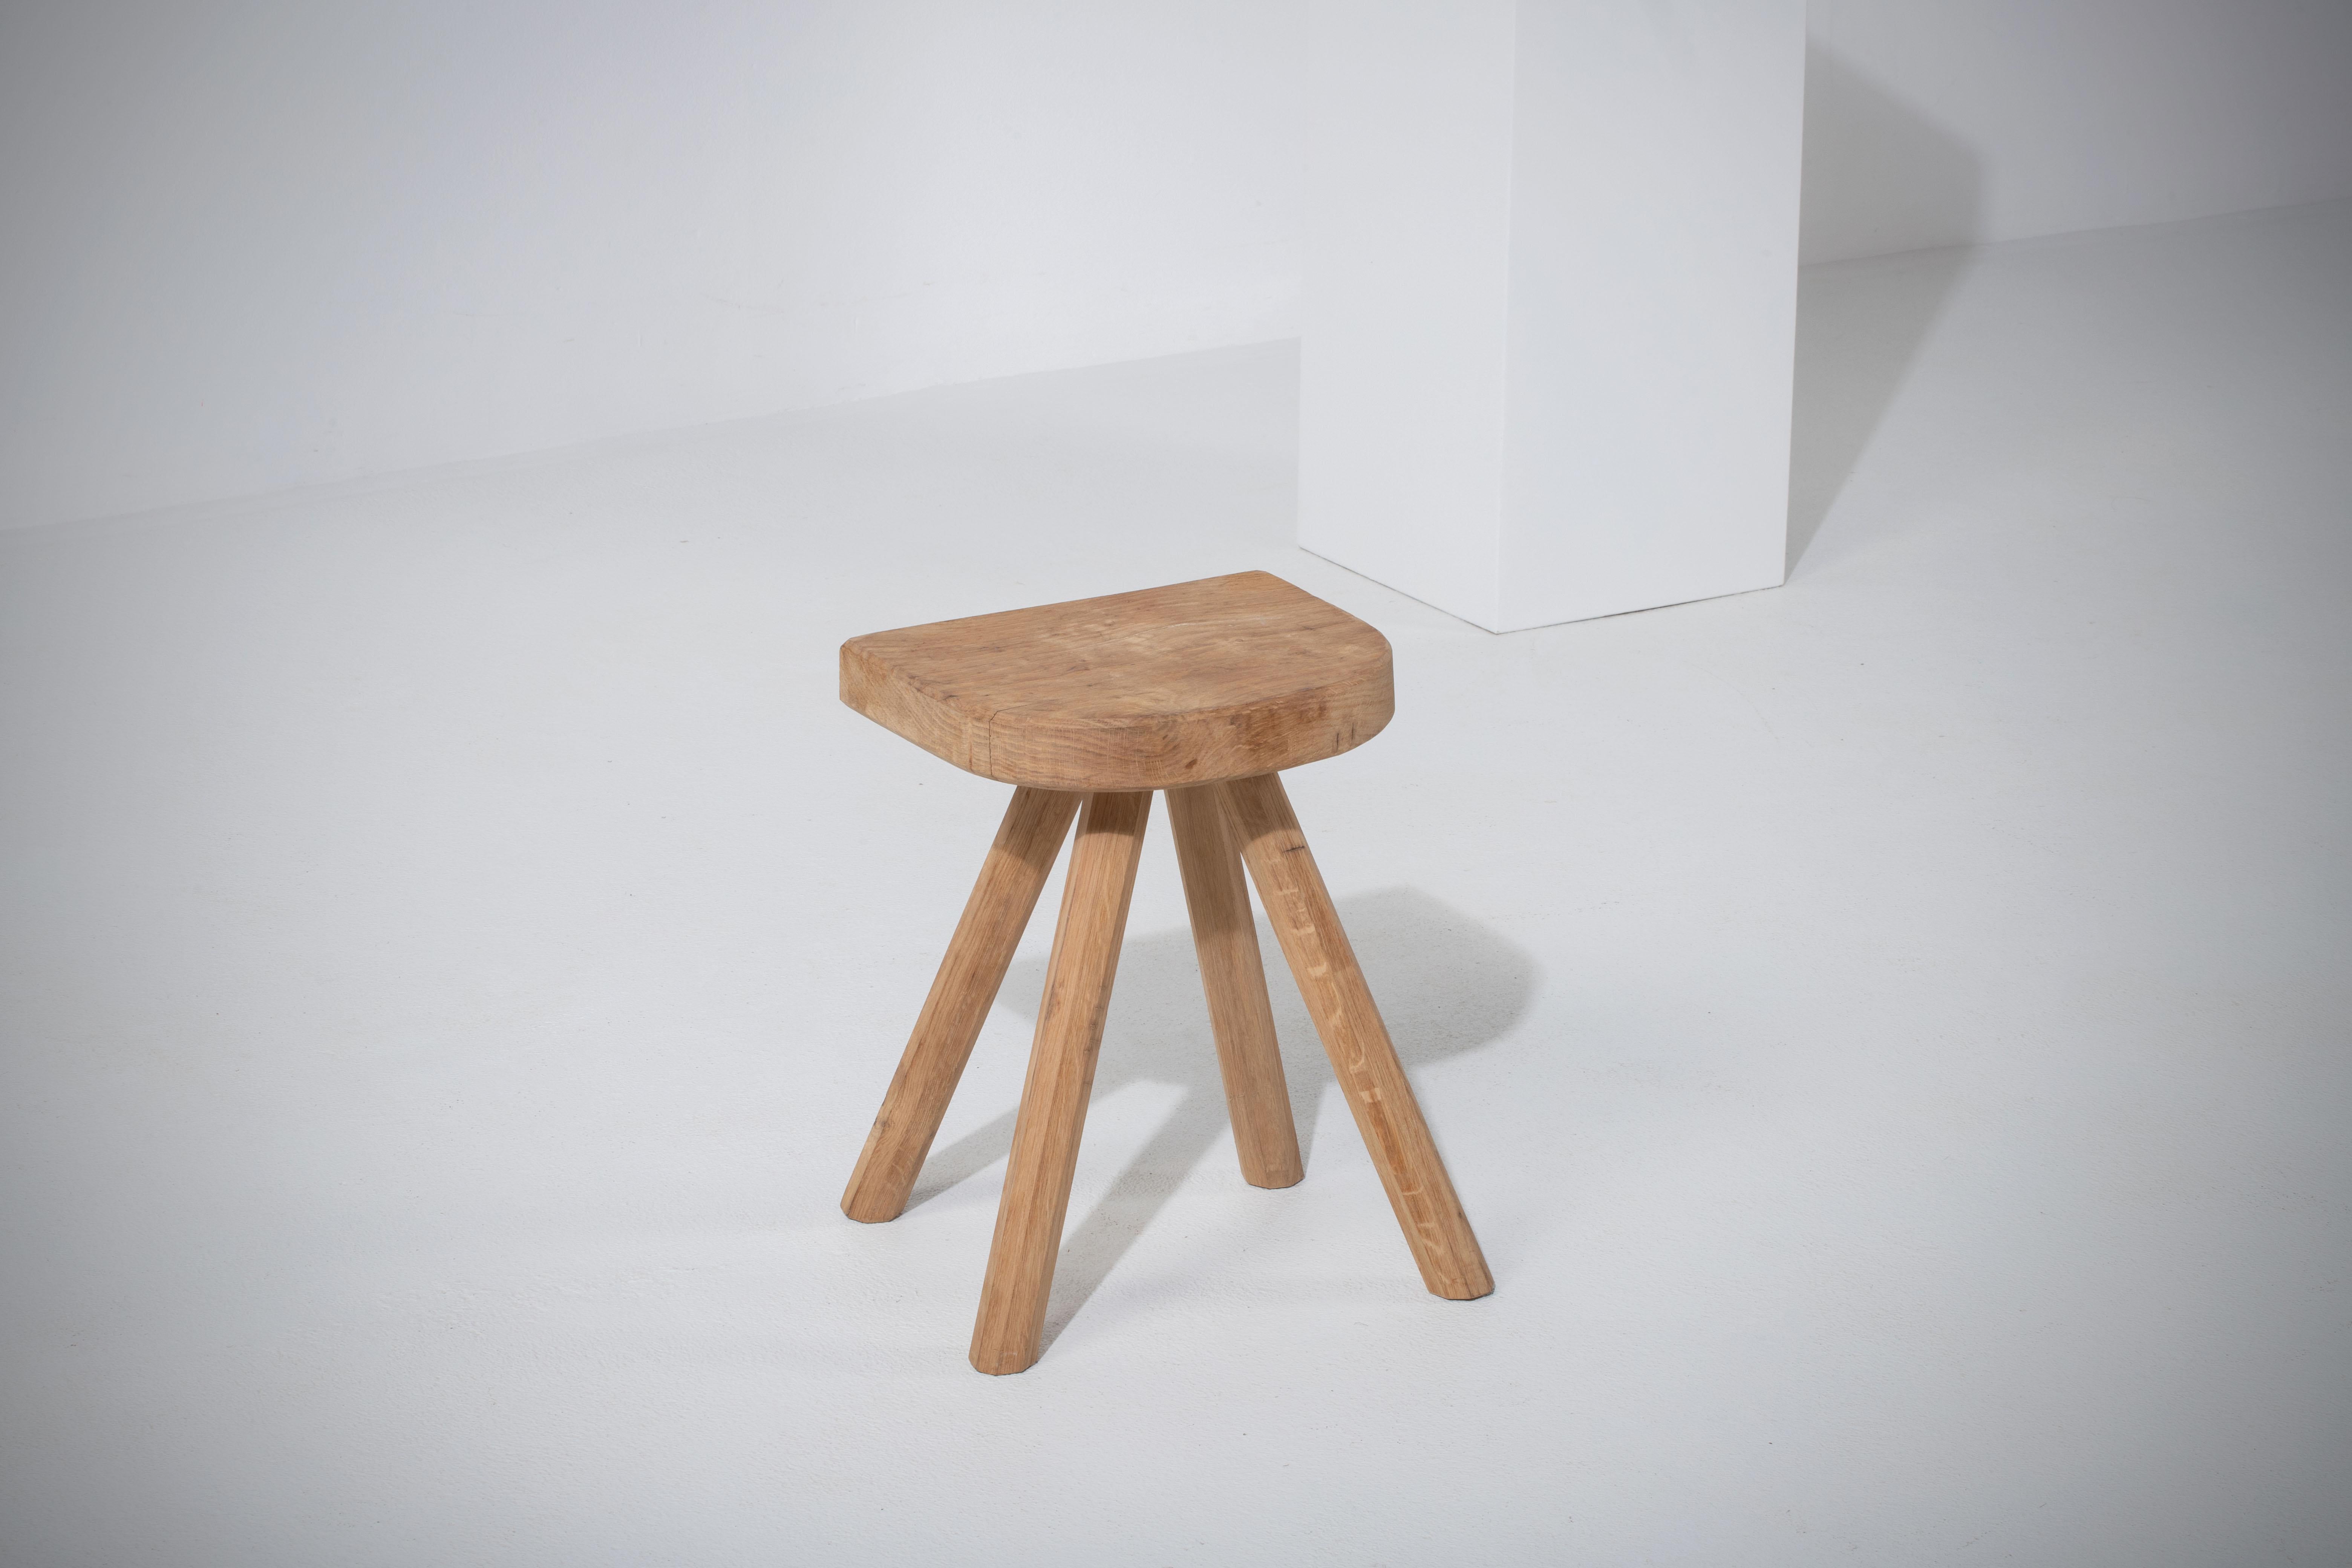 Introducing a captivating midcentury stool from France, exhibiting tripod flared feet and a gracefully simplistic design. Crafted from solid and raw natural oak, this stool embodies the spirit of unrefined elegance. The sturdy construction and